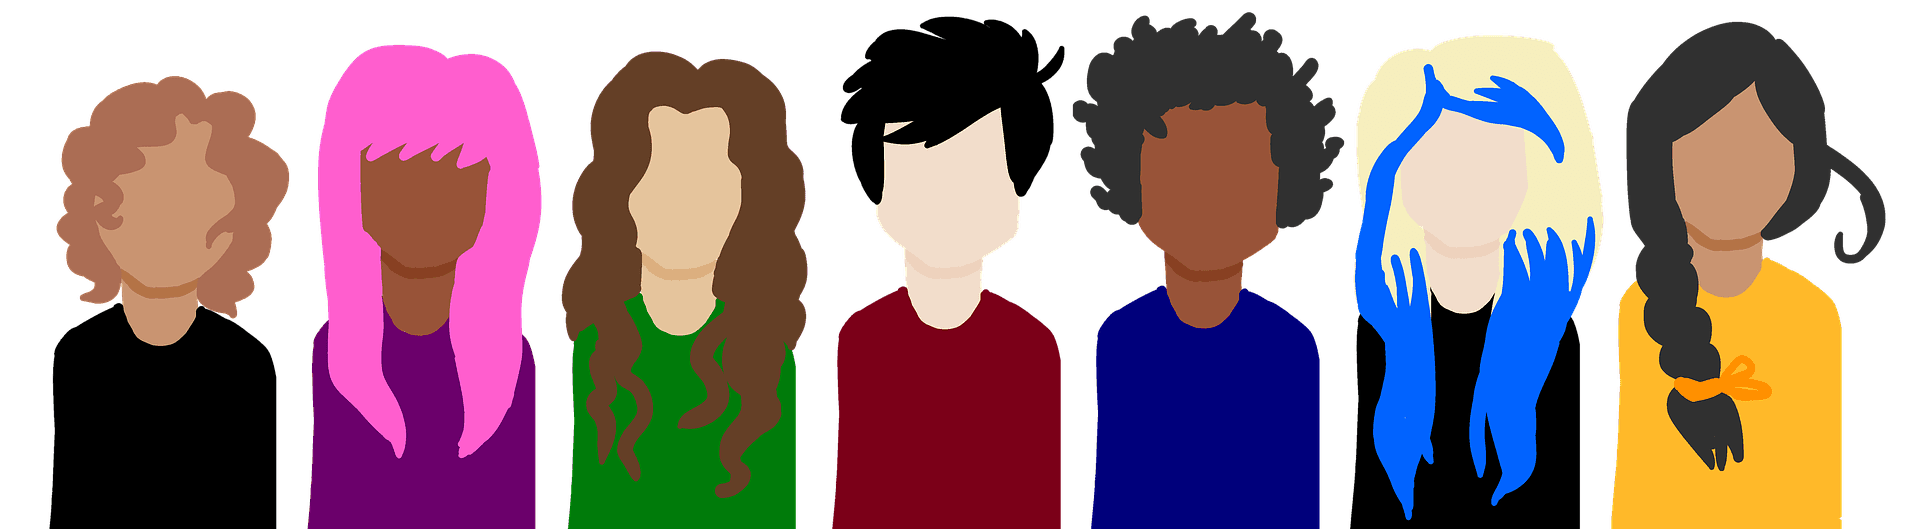 an abstract illustration of diverse characters